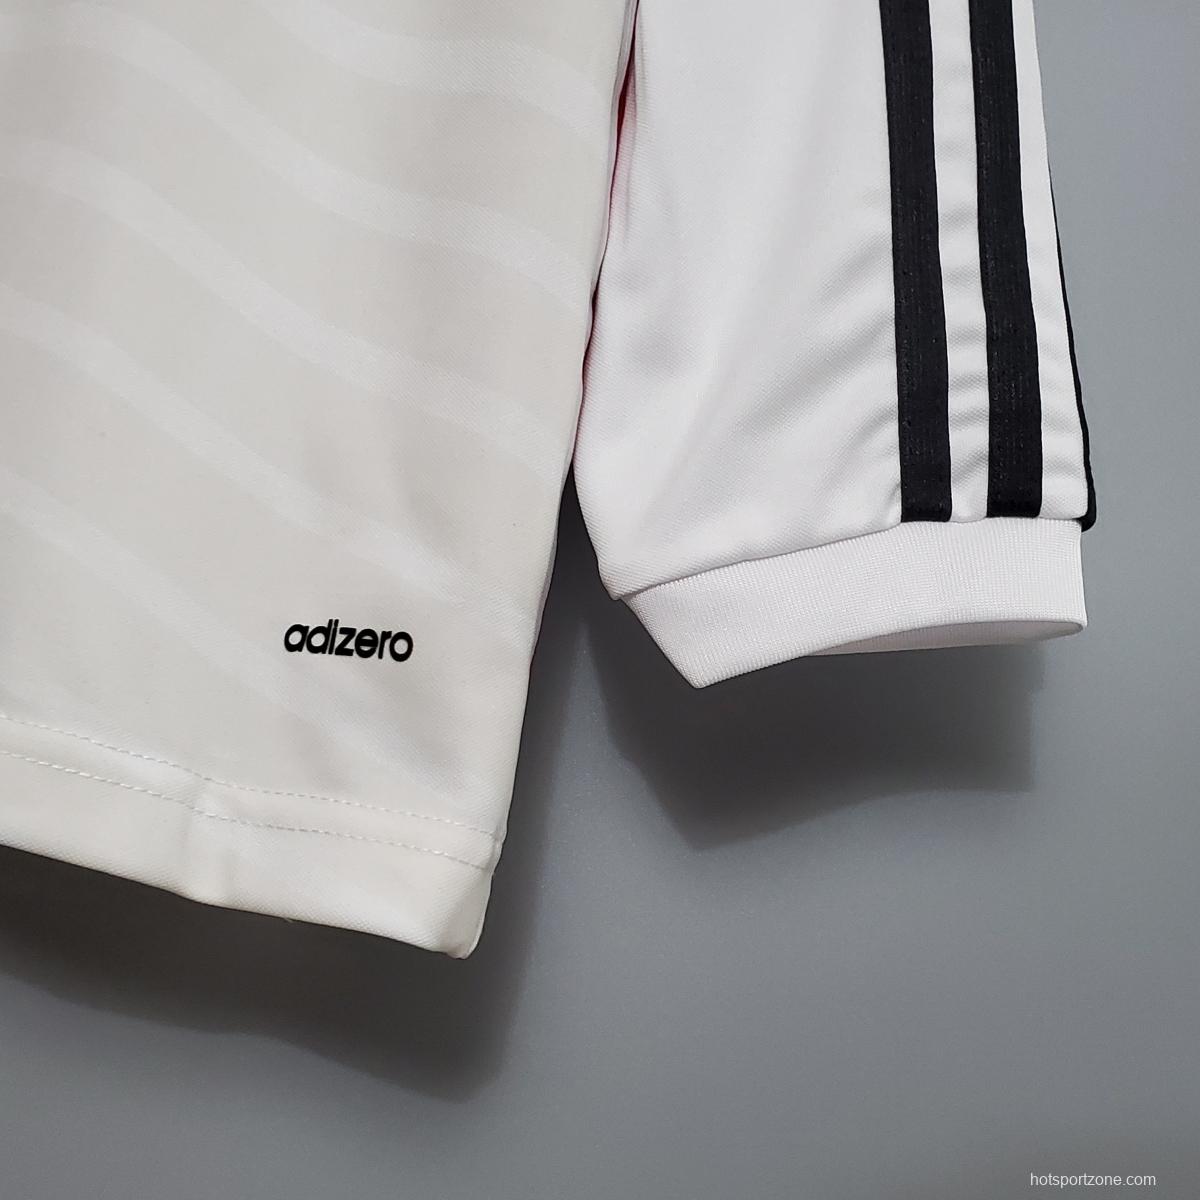 Retro Long Sleeve Real Madrid 14/15 home Soccer Jersey